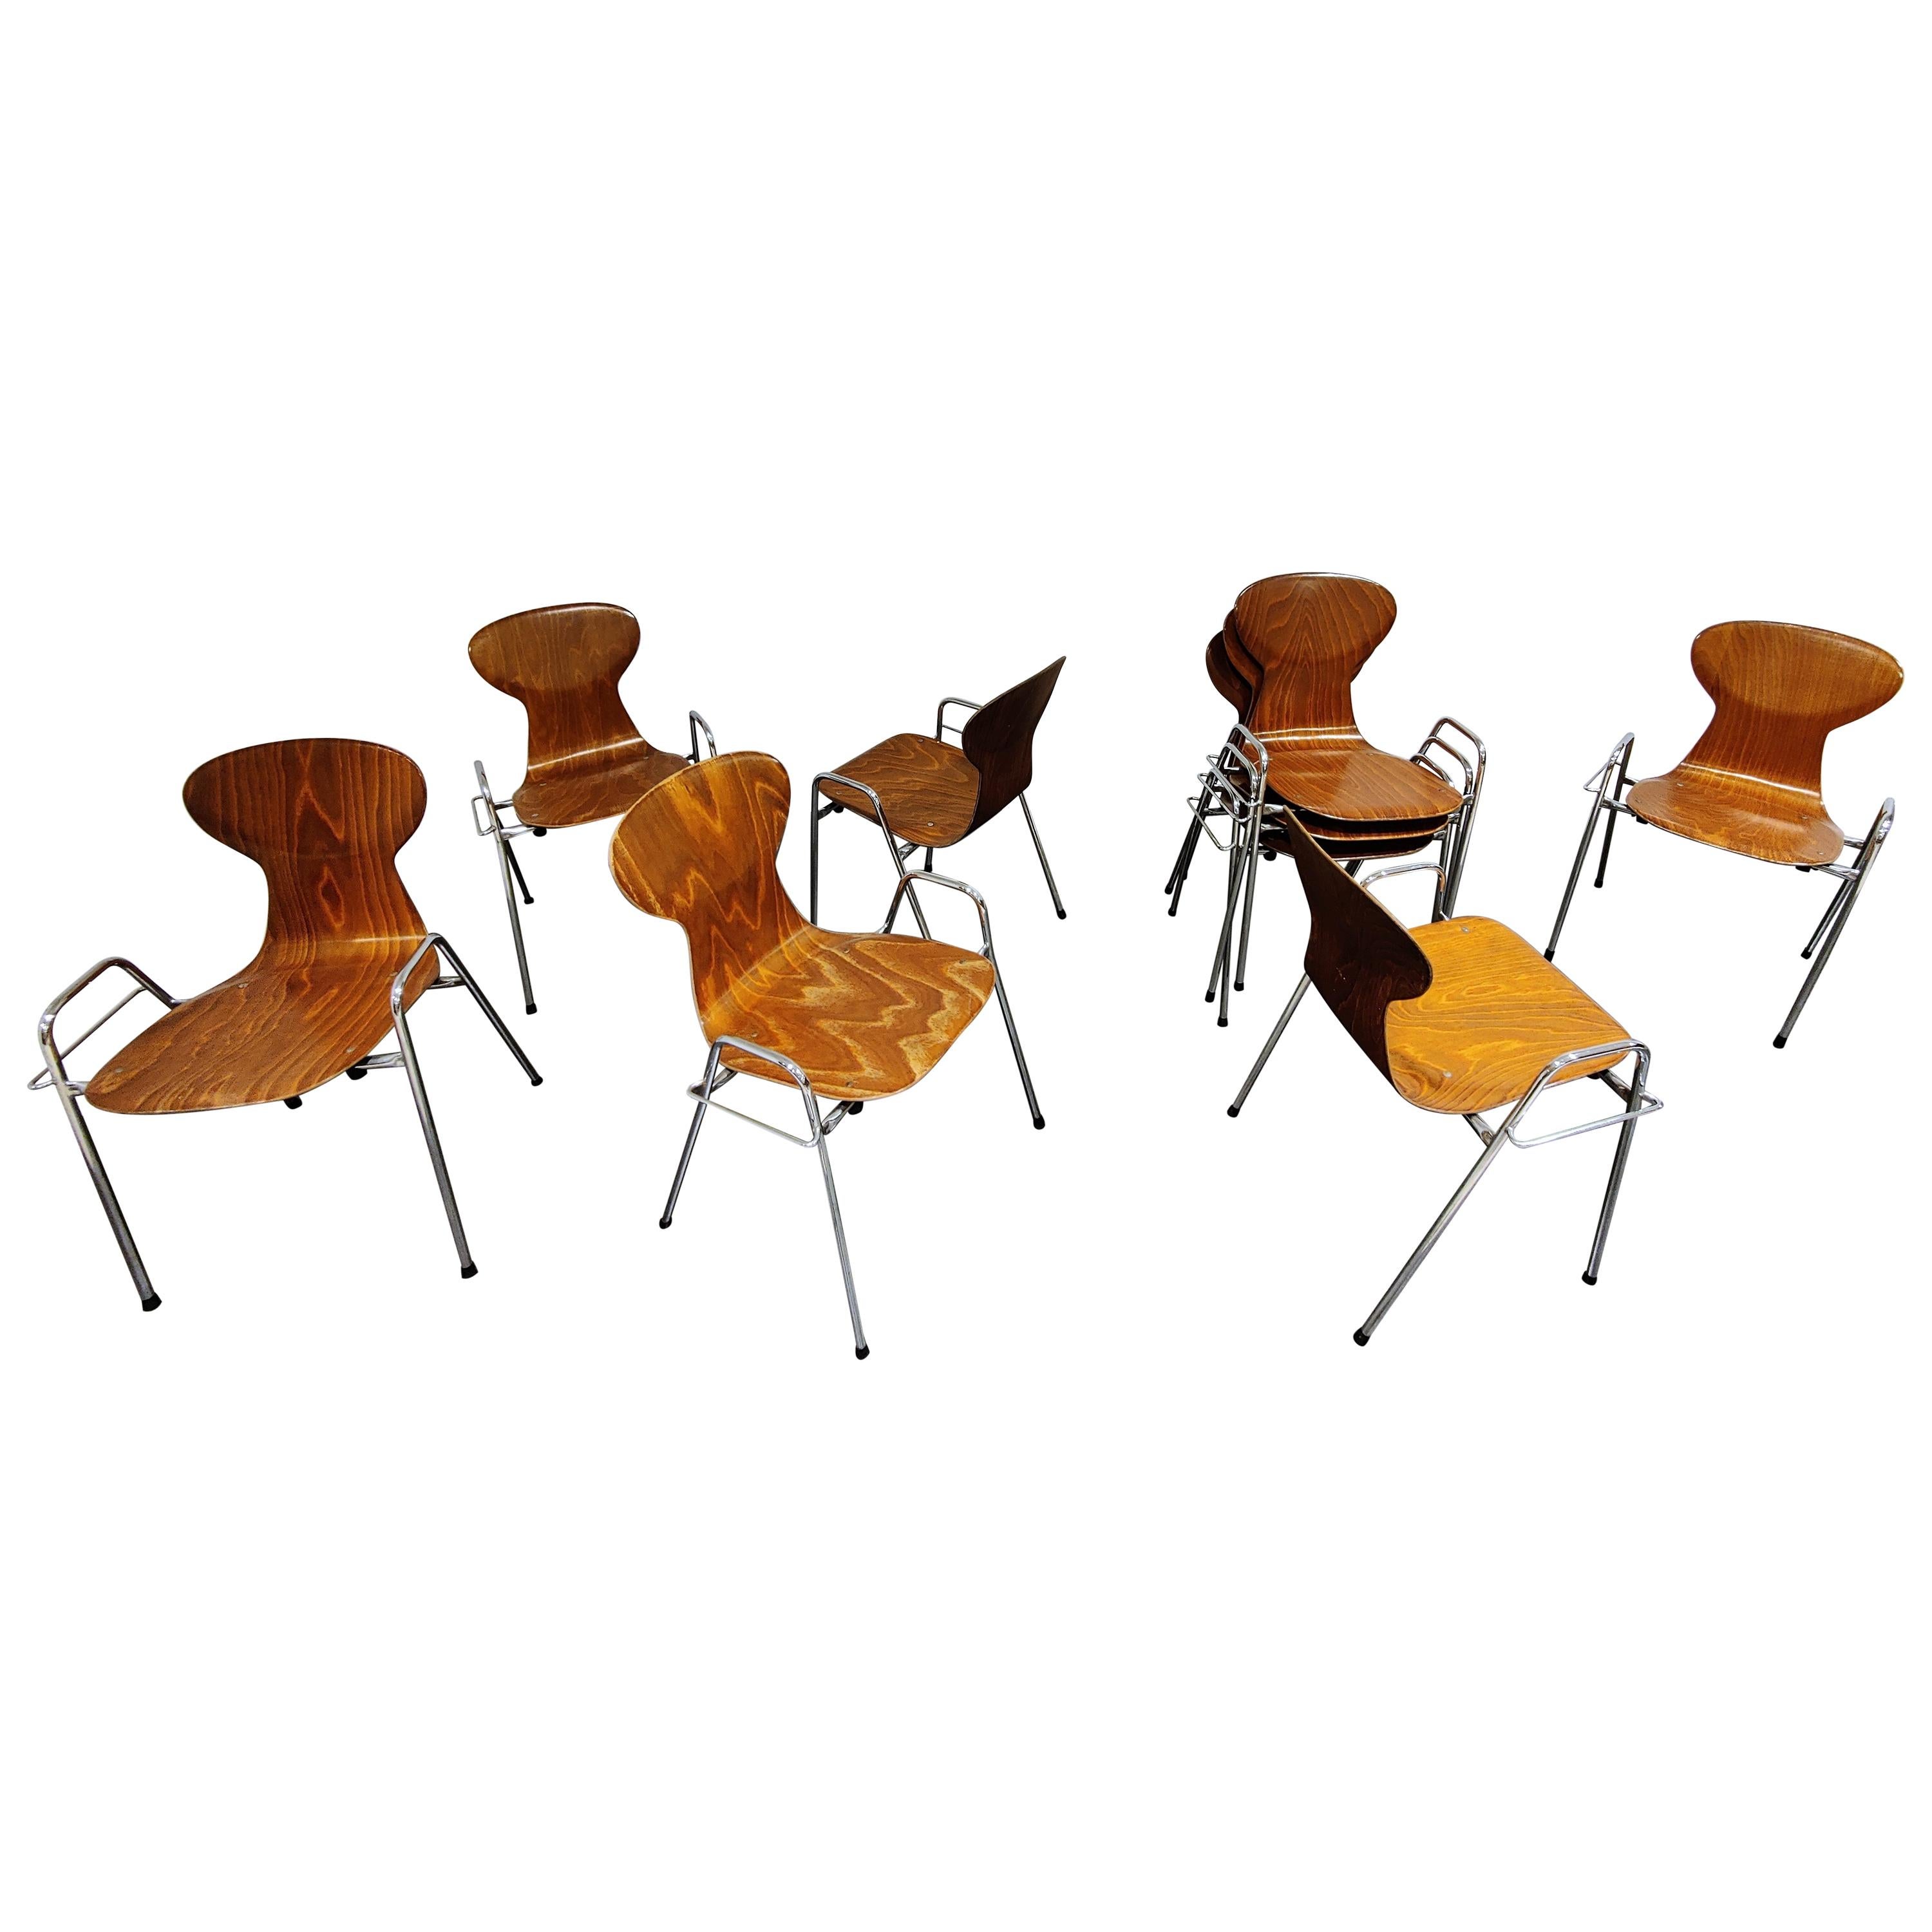 Vintage Plywood Chairs by Tubax, Belgium, Set of 8, 1980s